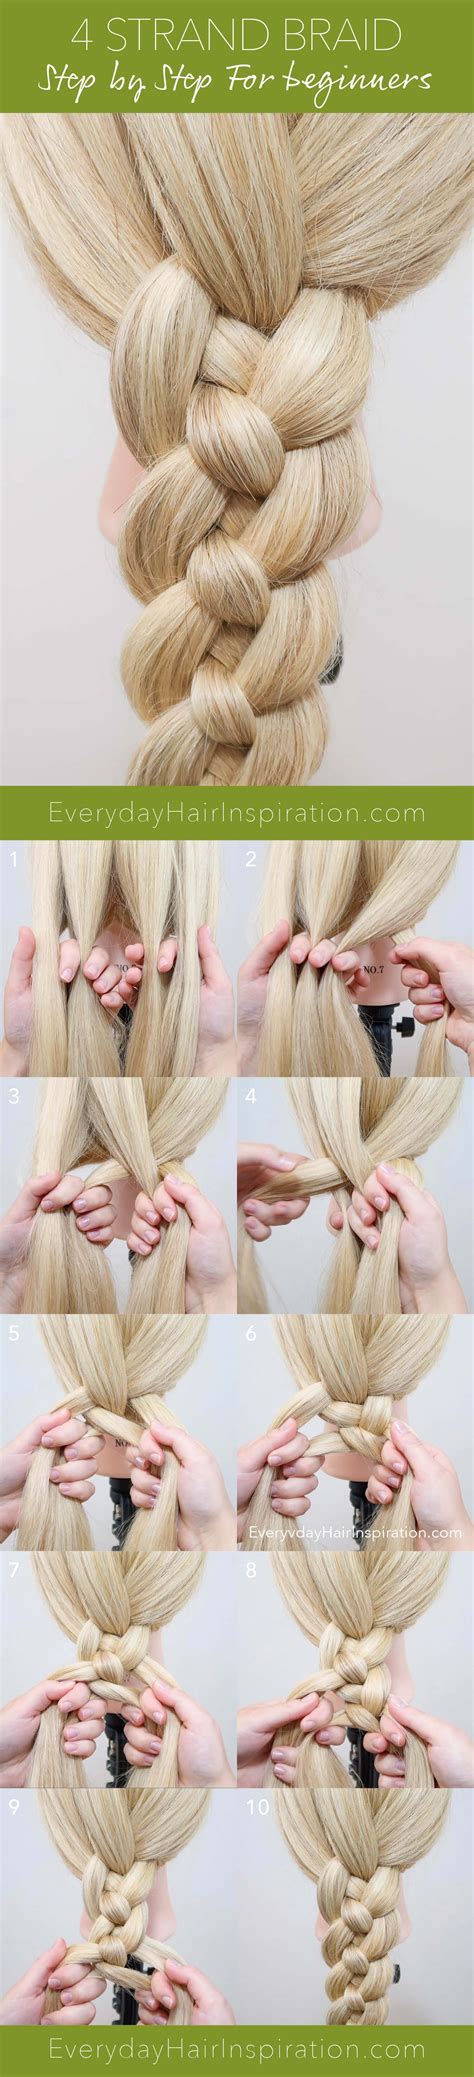 To form the round braid, keep bringing an outer strand under and around the middle strands and tug tightly once you've wrapped it. How To 4 Strand Braid - Everyday Hair inspiration - BRAIDED STYLES